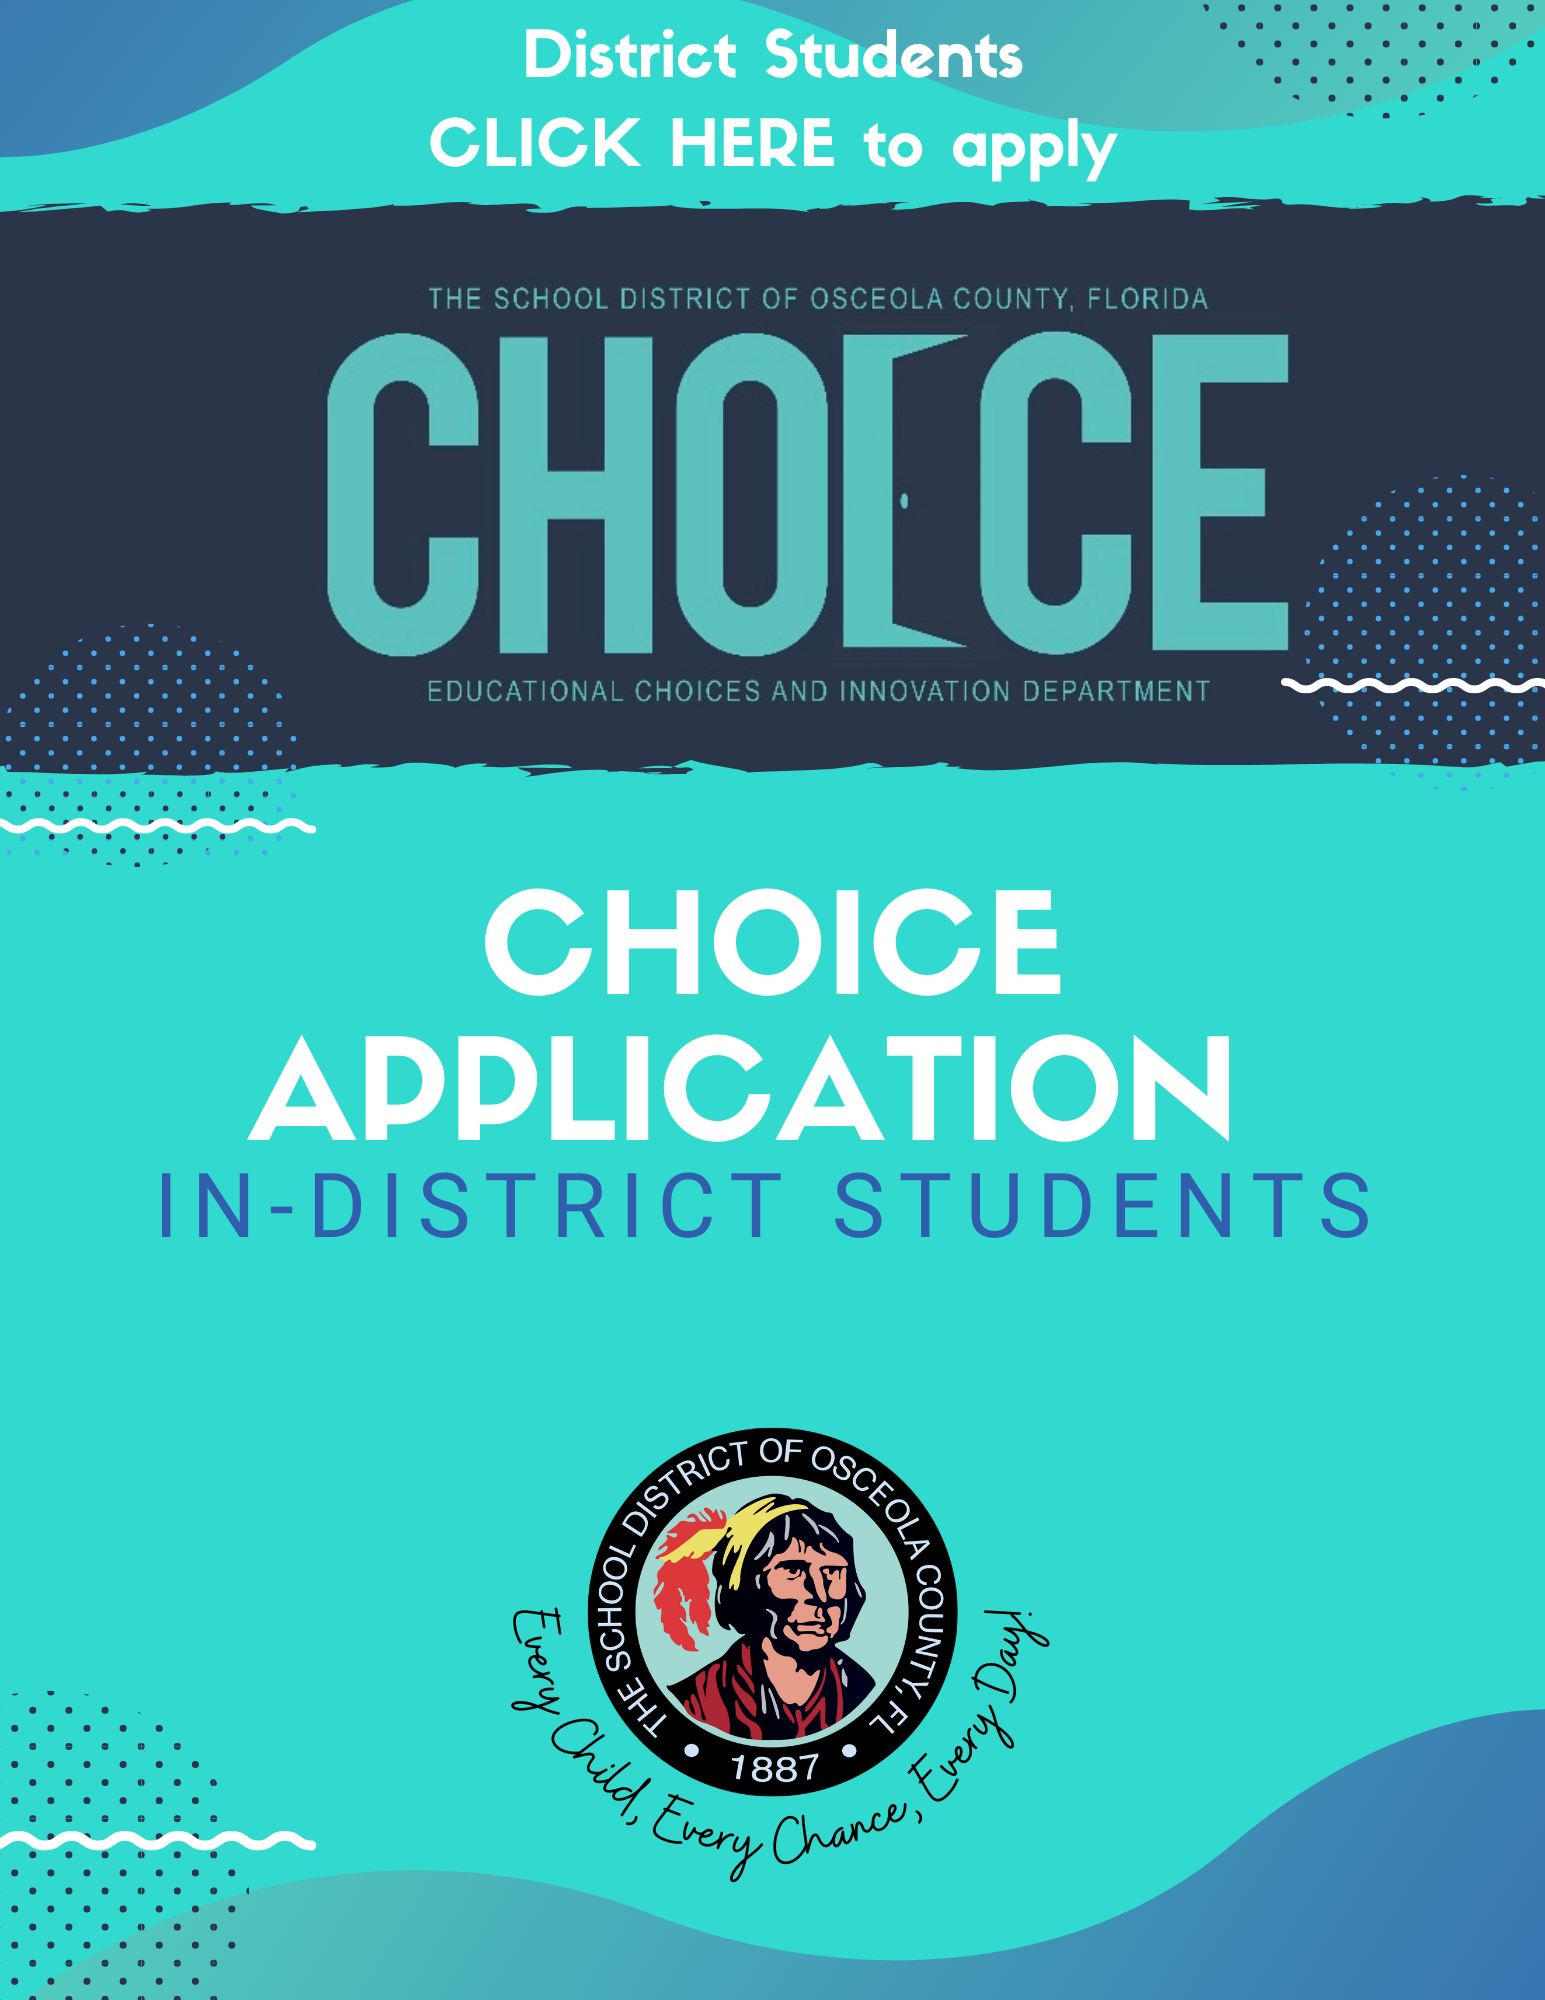 Choice Application for In-District Students